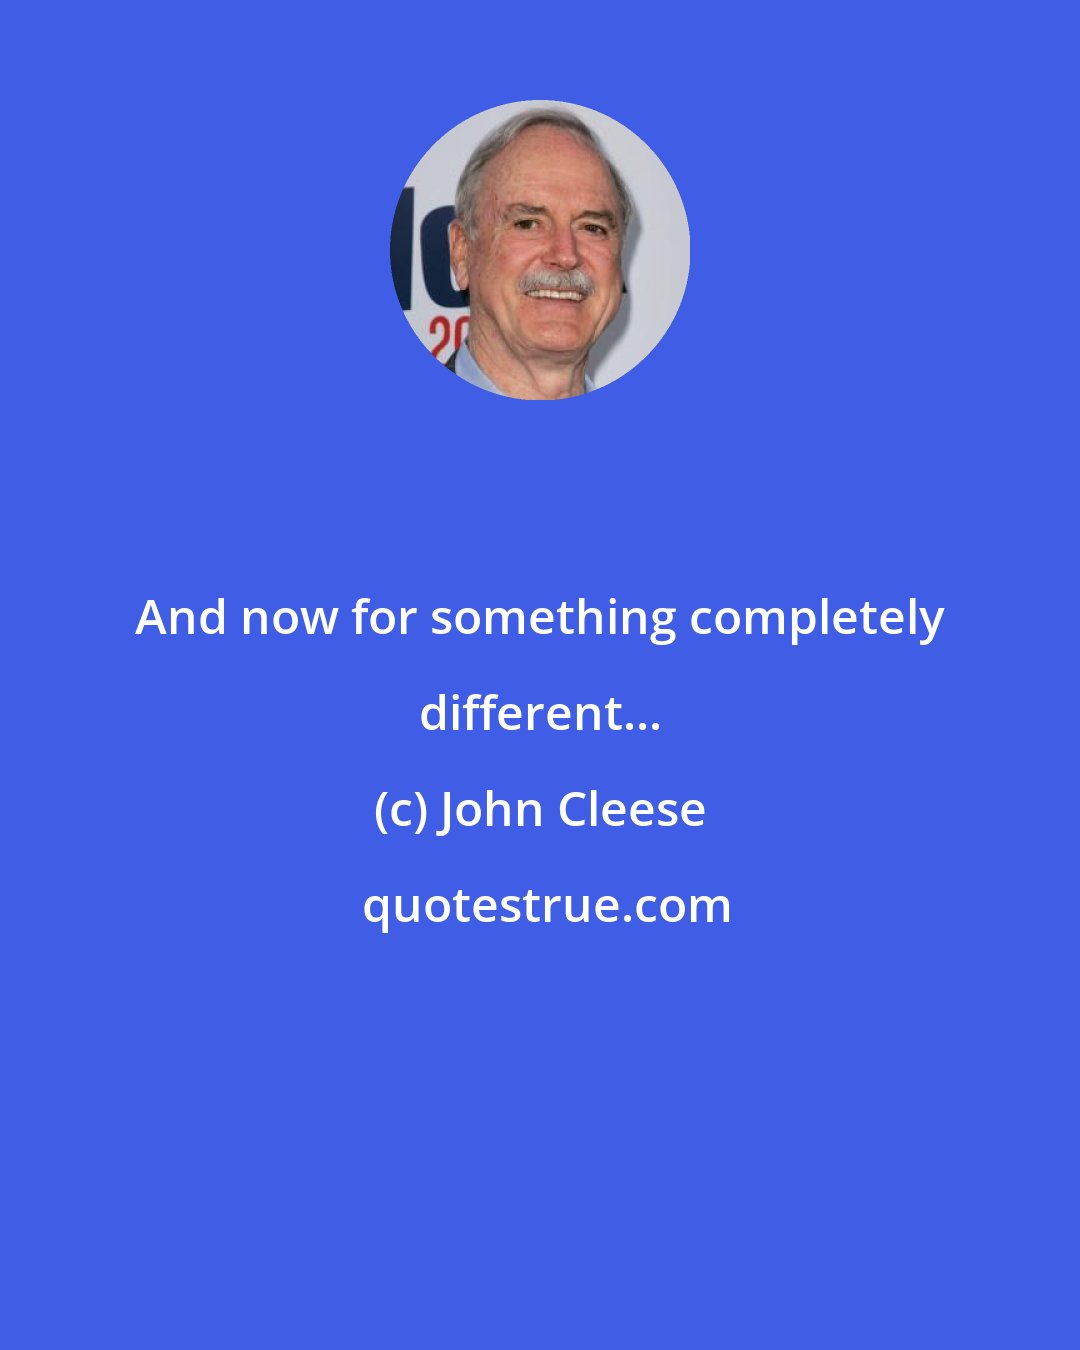 John Cleese: And now for something completely different...